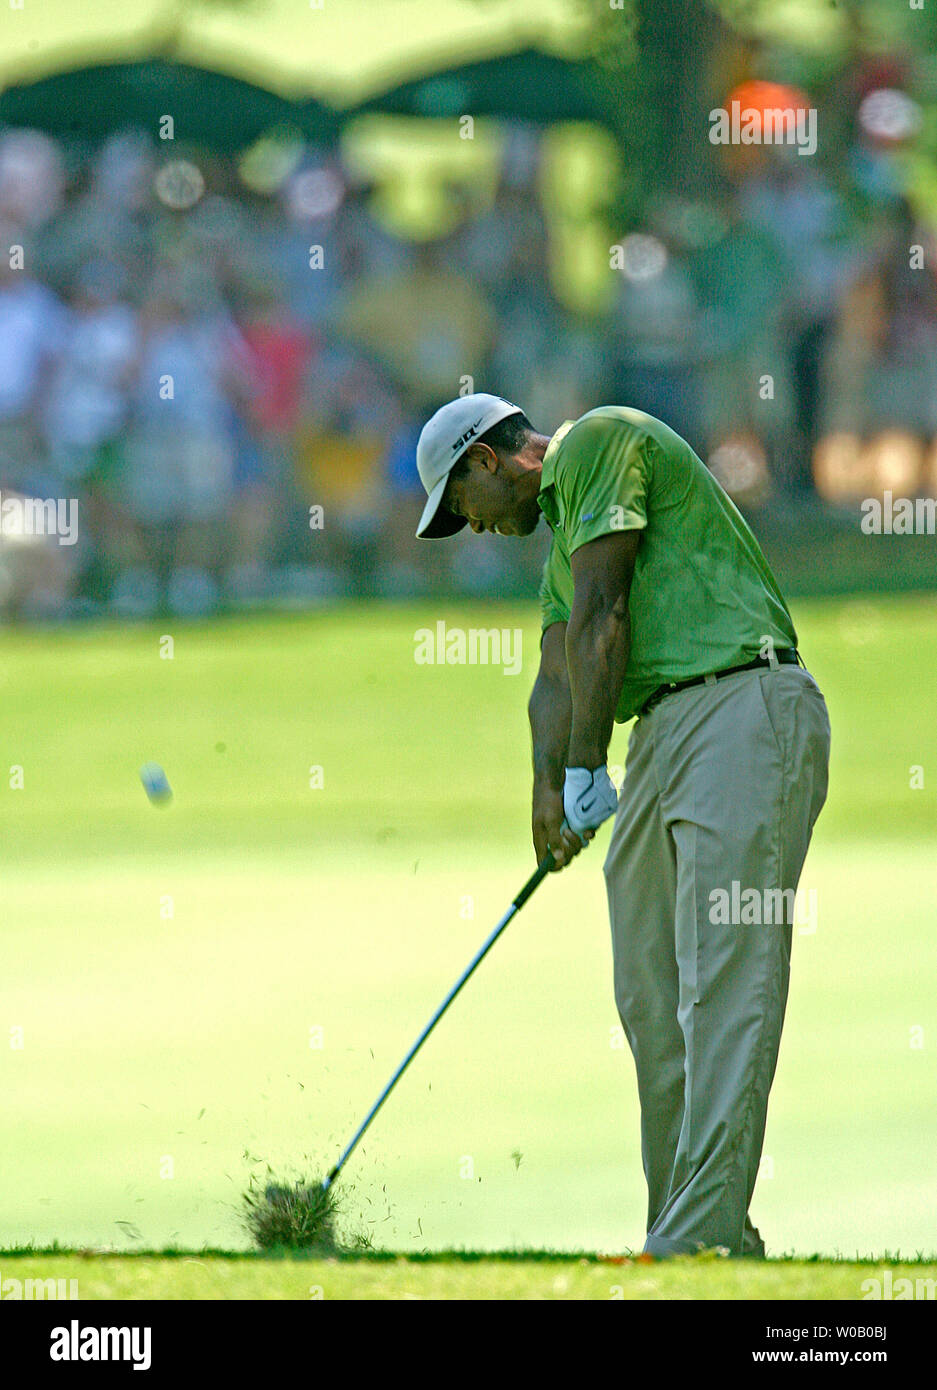 Leader Tiger Woods hits from the rough on the first hole during the third round of the 89th PGA Championship at Southern Hills Country Club in Tulsa, Oklahoma on August 11, 2007.   (UPI Photo/Gary C. Caskey) Stock Photo